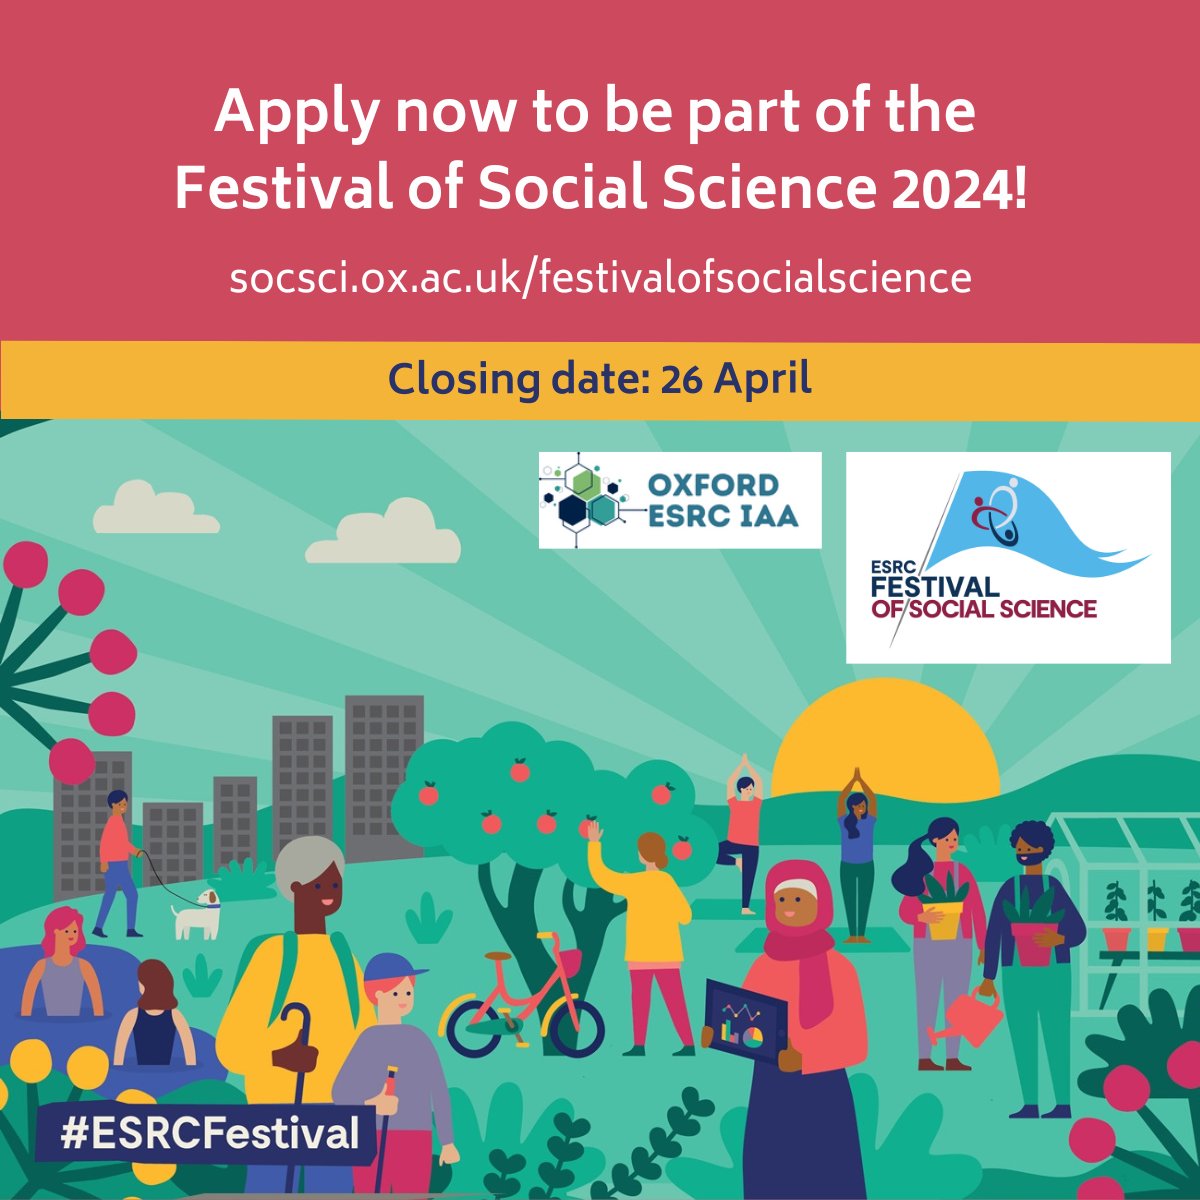 Are you a social scientist keen to share your research with the public through an inspiring public engagement event at @Pitt_Rivers on Fri 1 Nov - or elsewhere, between 19 Oct-9 Nov? Check out this year’s #FestivalofSocialScience call for EOIs: ow.ly/z5vu50Rbh9k